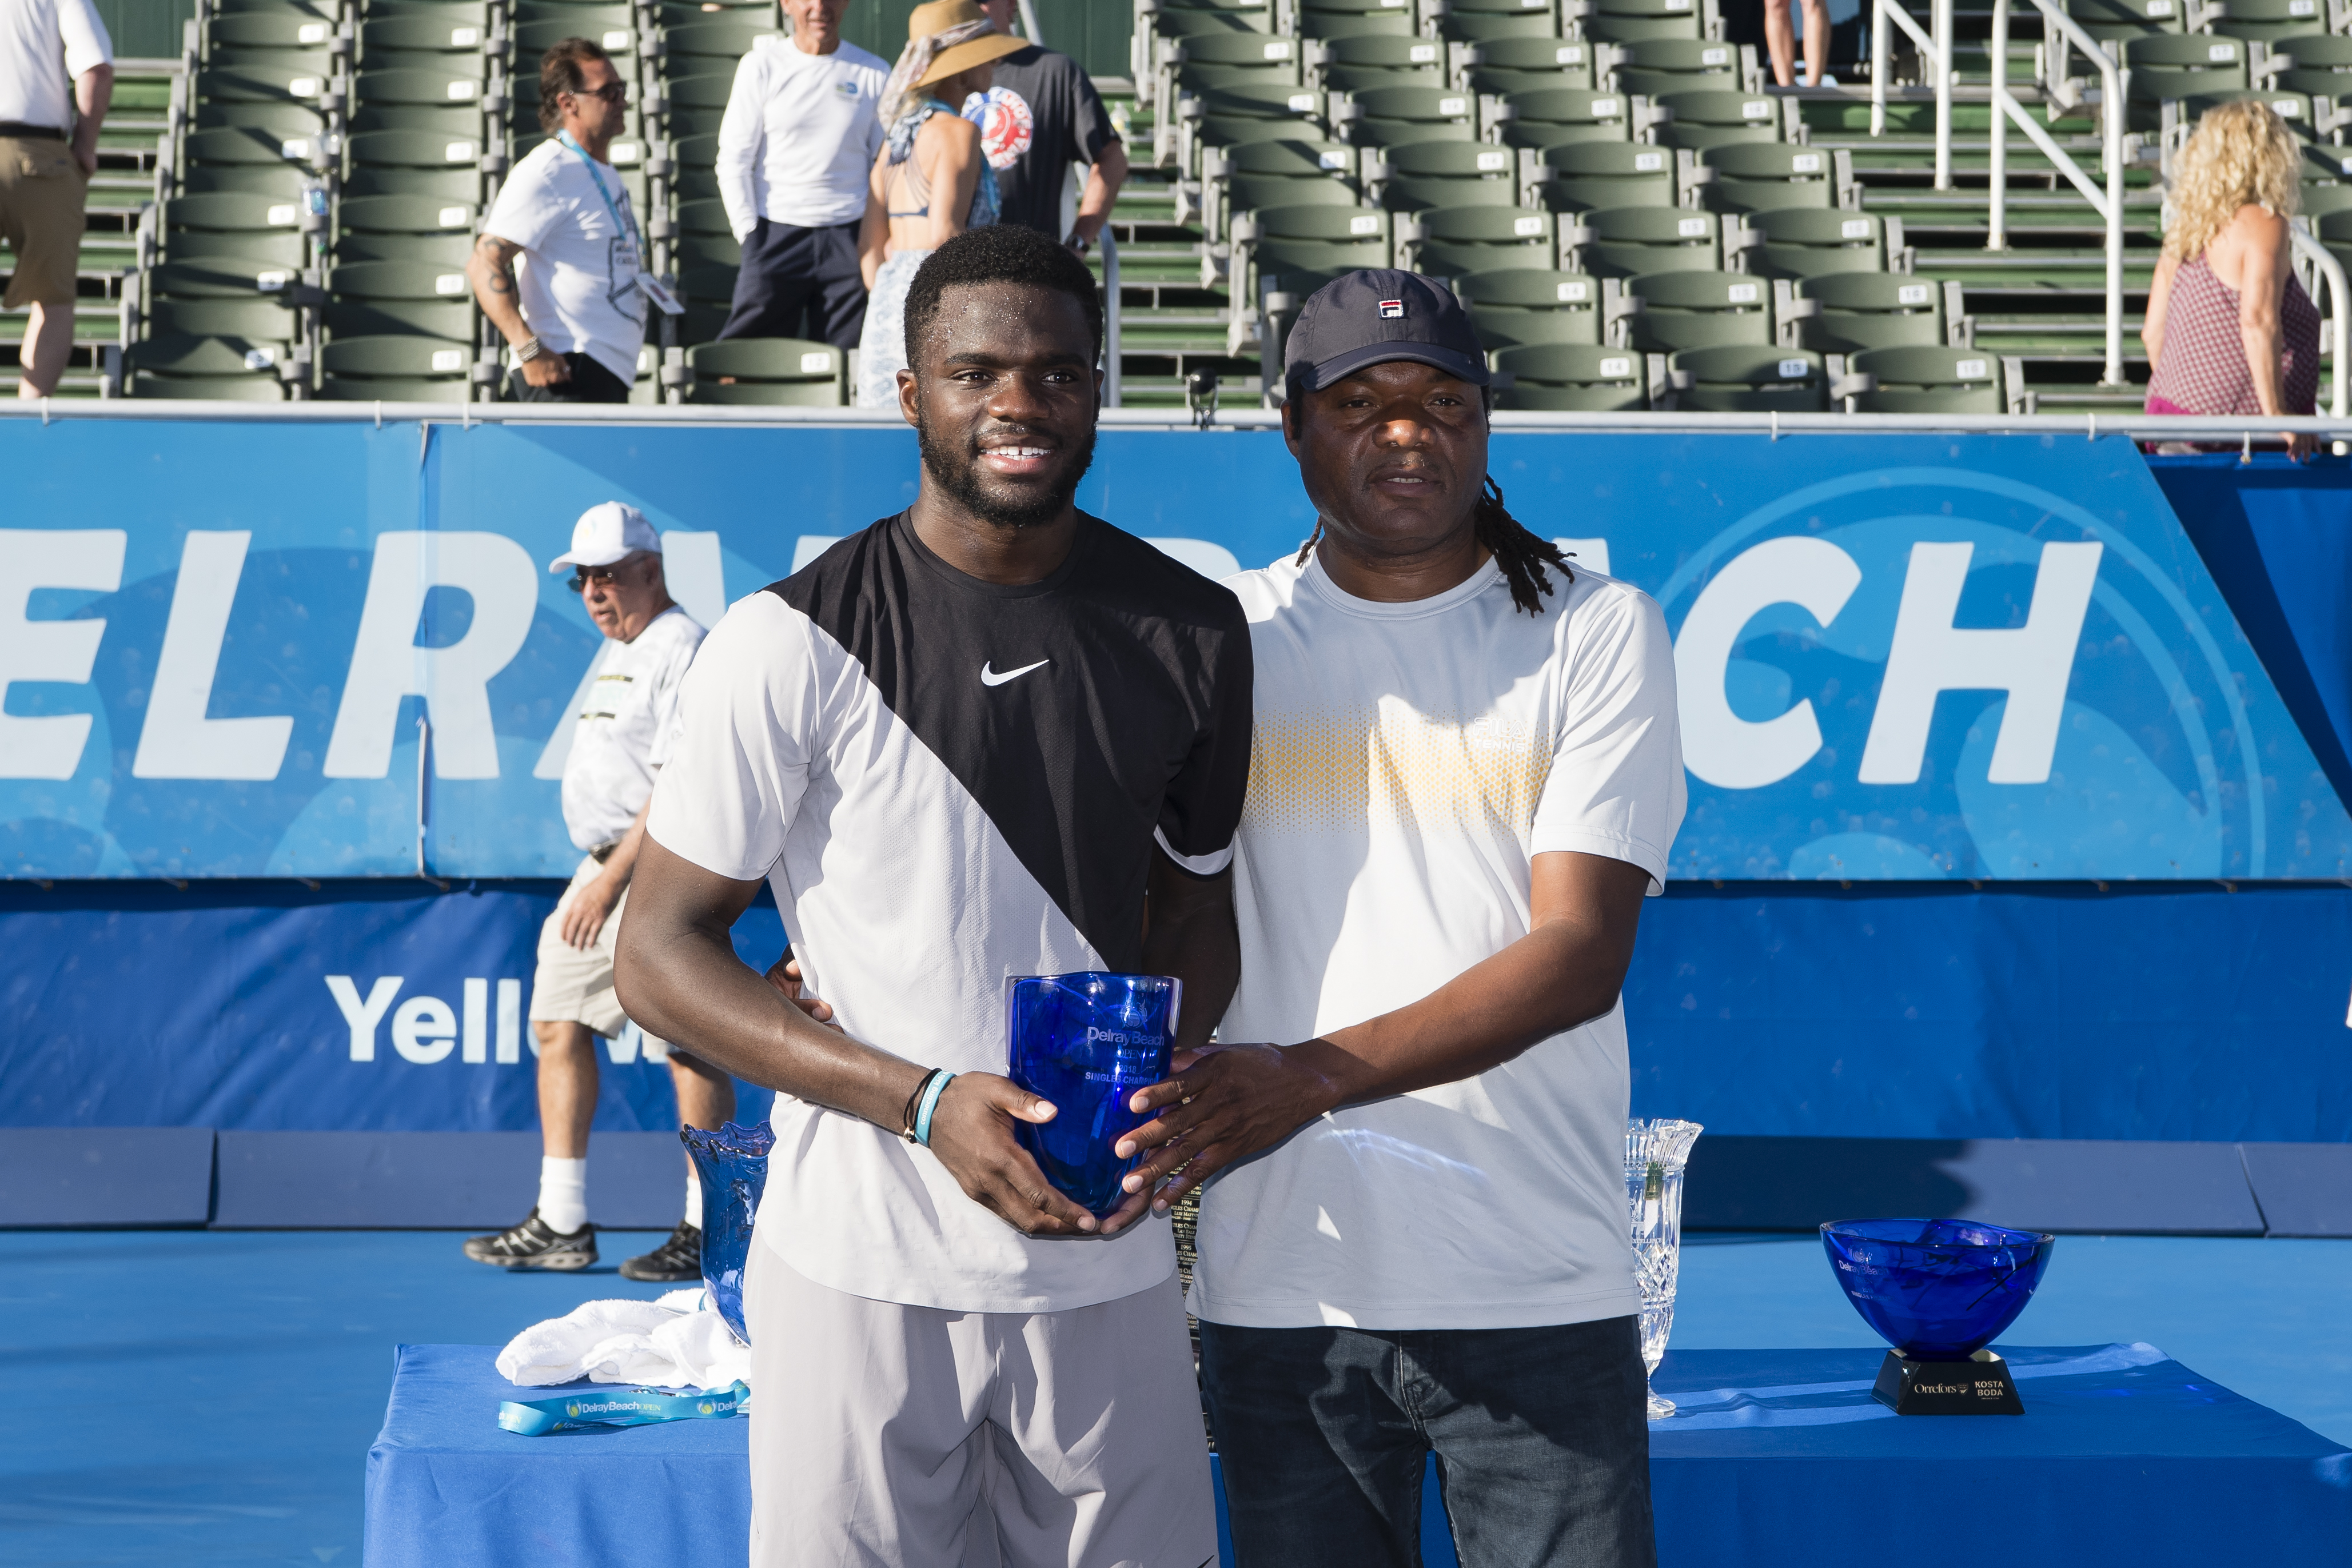 Championship winner Frances Tiafoe poses with his father, Constant Tiafoe, after his match with Peter Gojowczyk of Germany at the Delray Beach Open held at the Delray Beach Stadium & Tennis Center on February 25, 2018, in Delray Beach, Florida. | Source: Getty Images